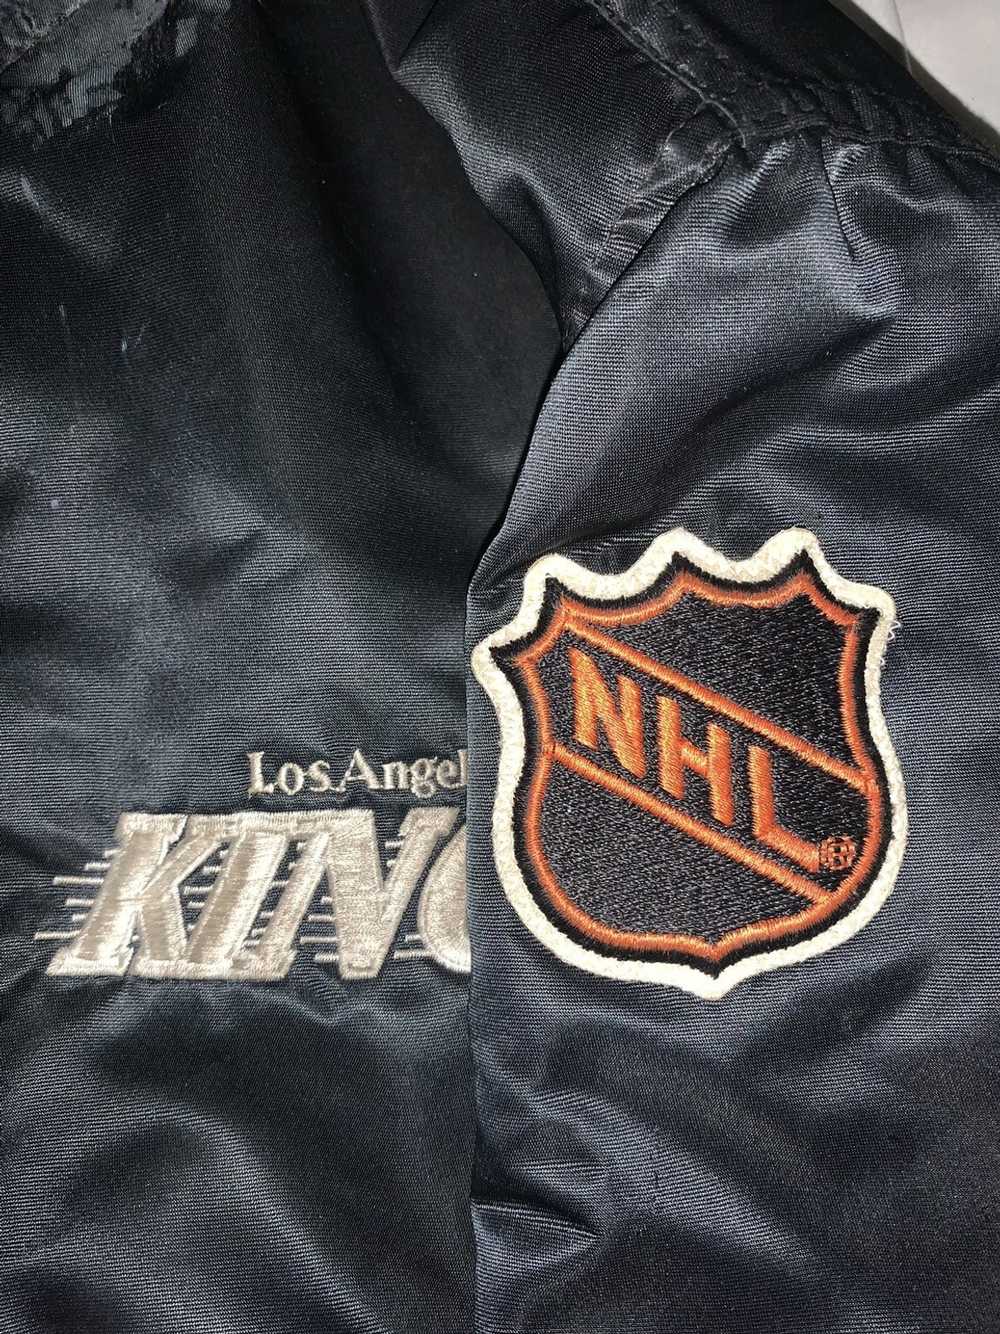 VINTAGE RARE STARTER CENTER ICE LOS ANGELES KINGS 1/2 ZIP PULLOVER